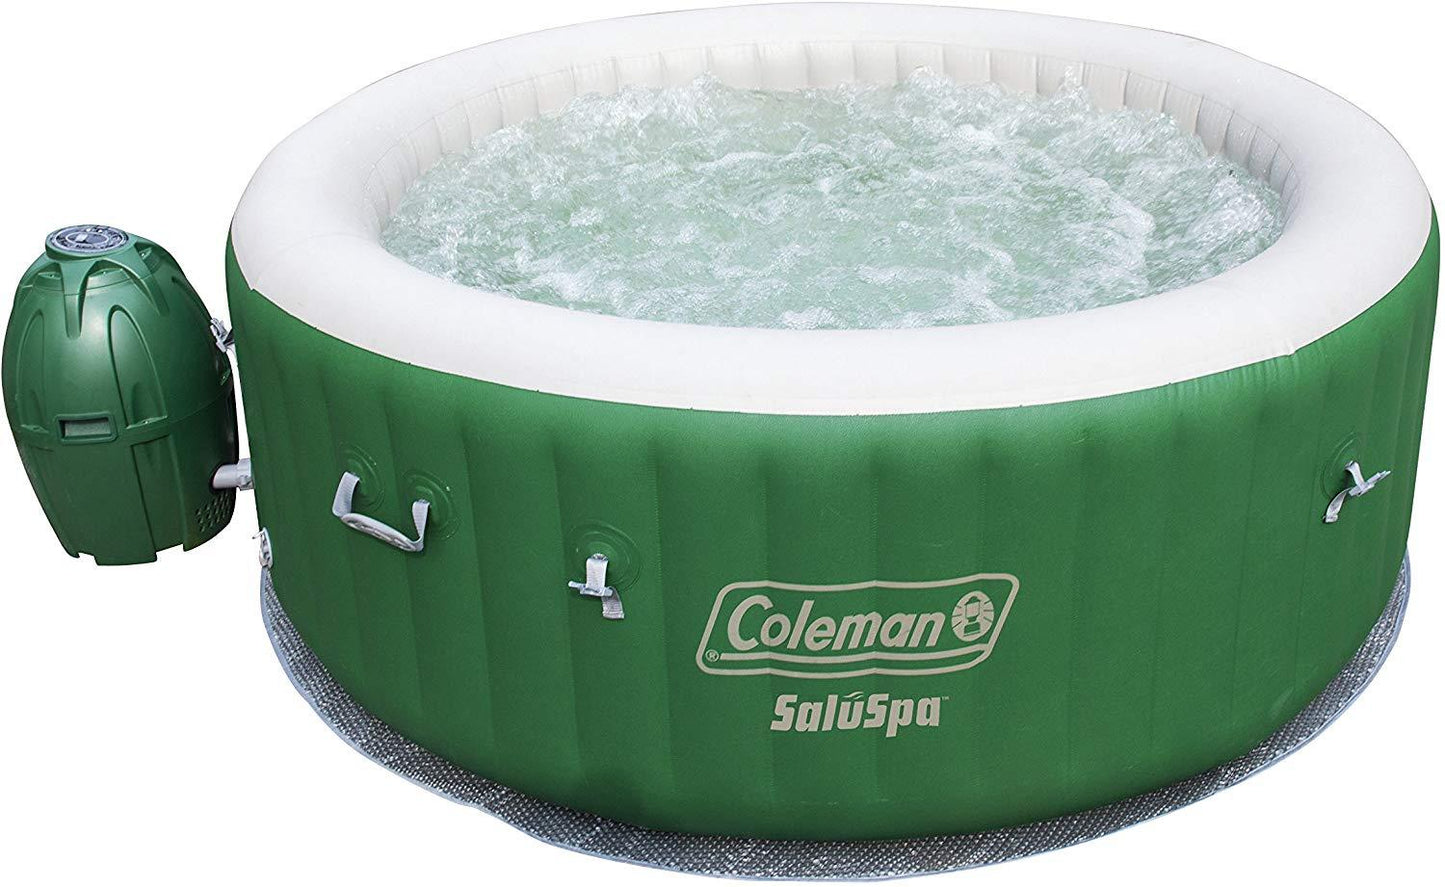 Inflatable Hot Tub - oddgifts.com